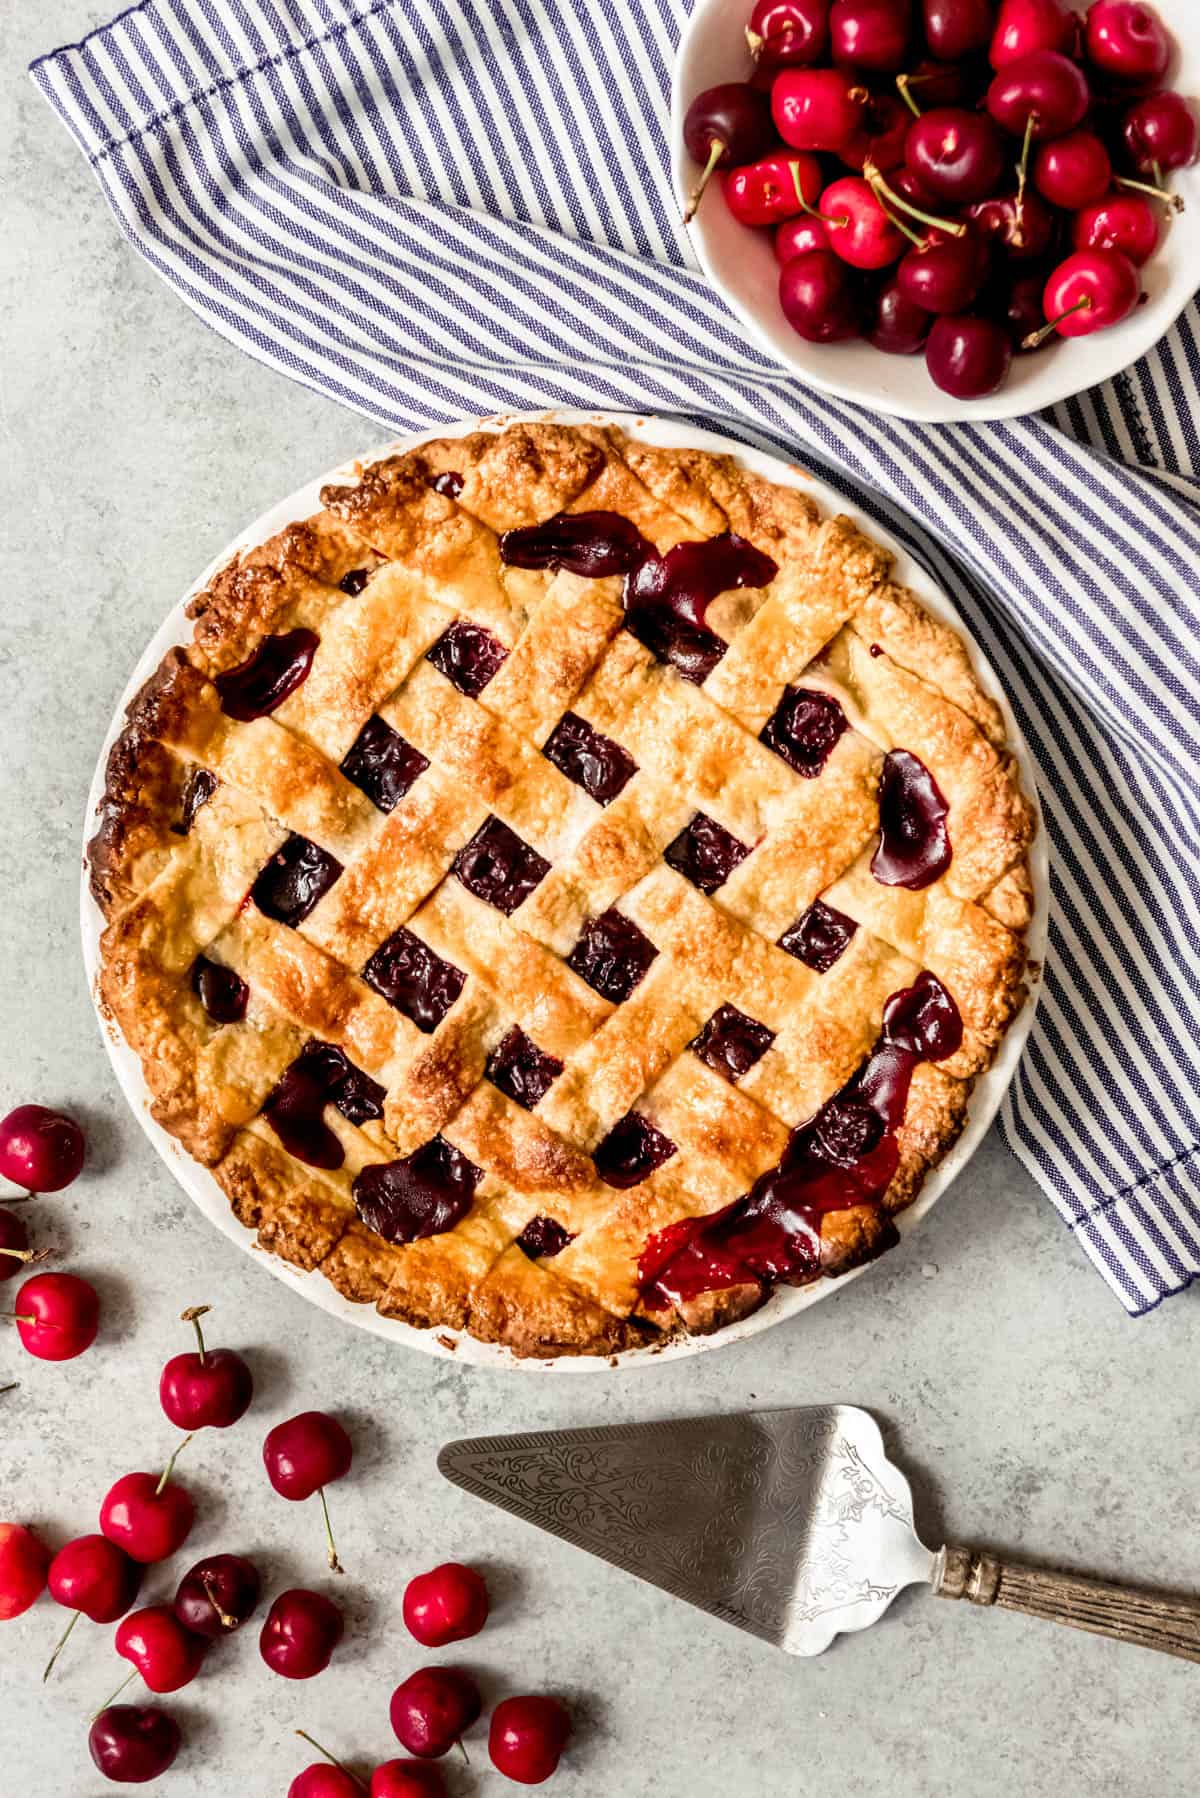 An image of a cherry pie with lattice pie crust on top.